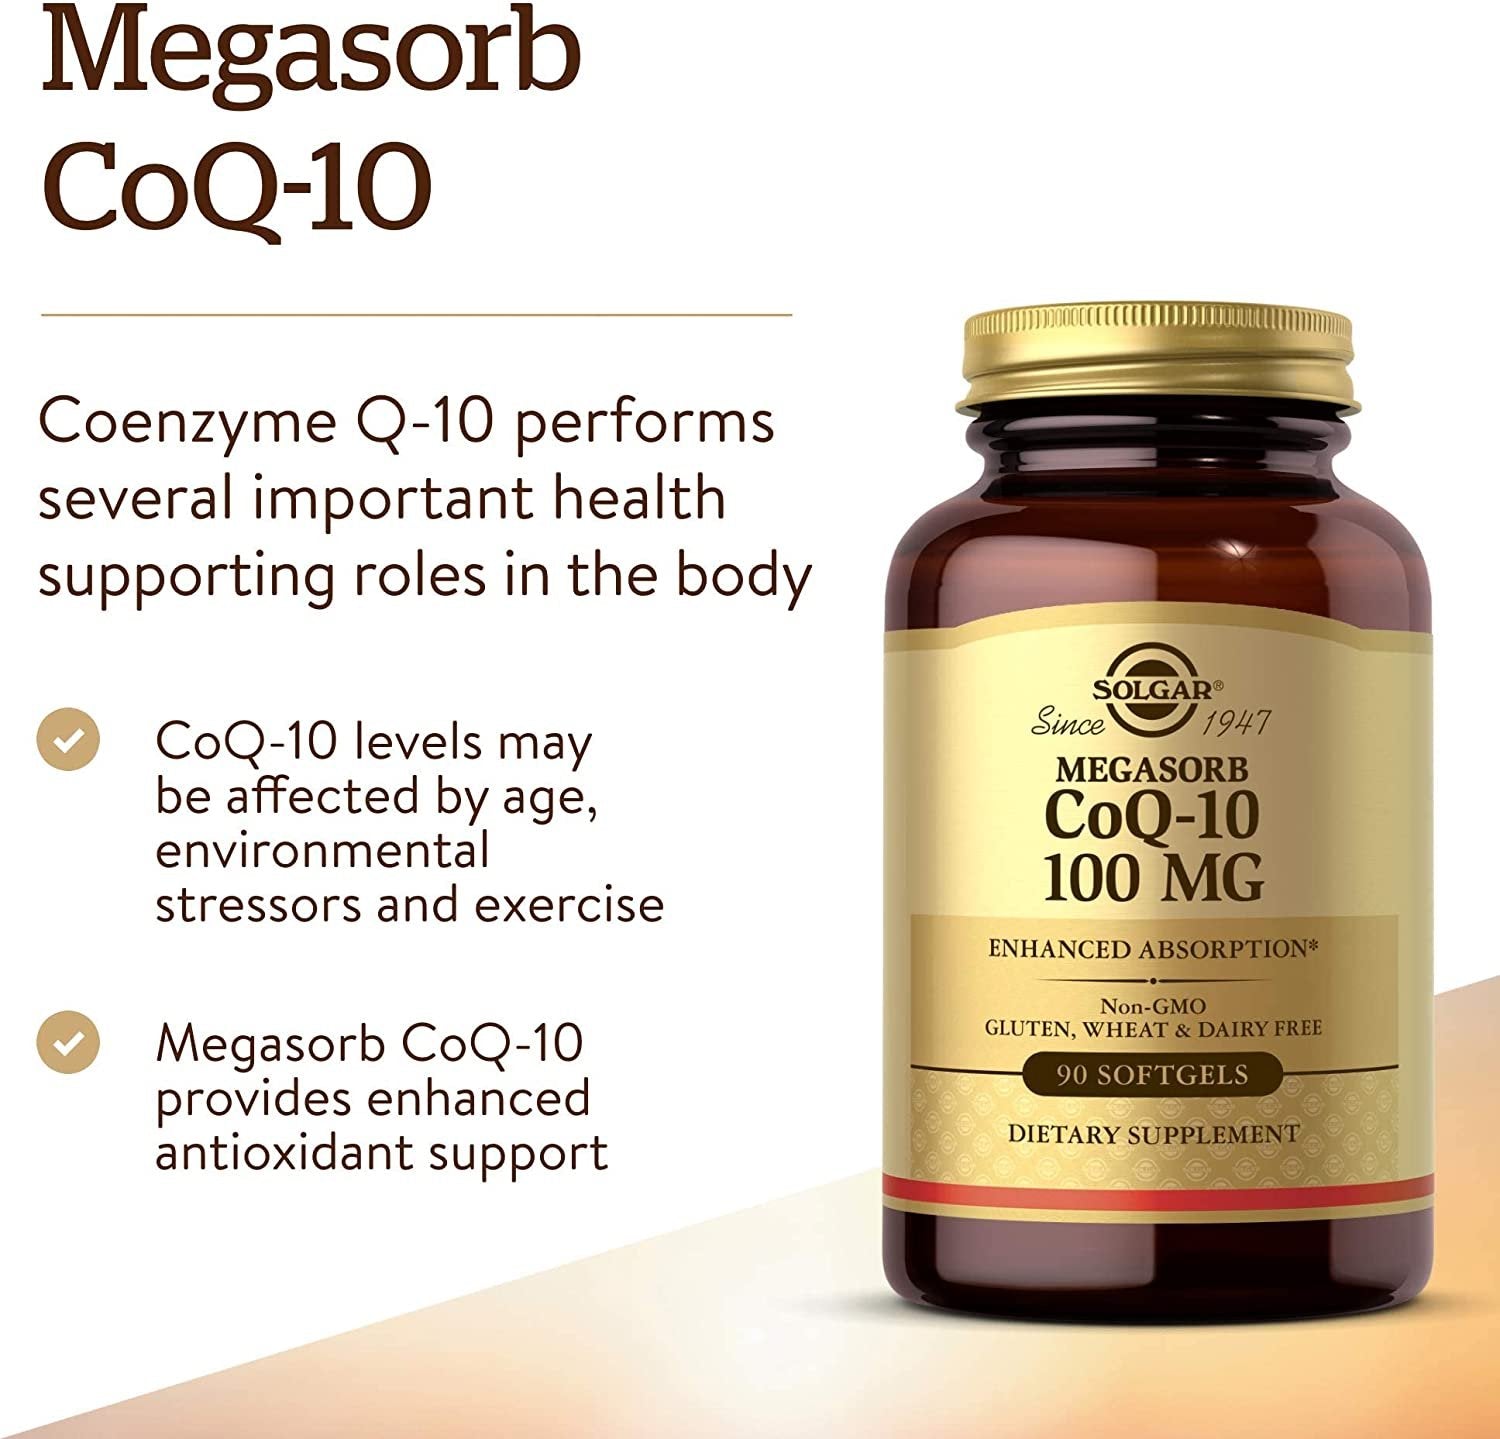 Solgar Megasorb CoQ-10 100 mg, 90 Softgels - Supports Heart Function & Healthy Aging - Coenzyme Q10 Supplement - Enhanced Absorption - Non-GMO, Gluten Free, Dairy Free - 90 Servings